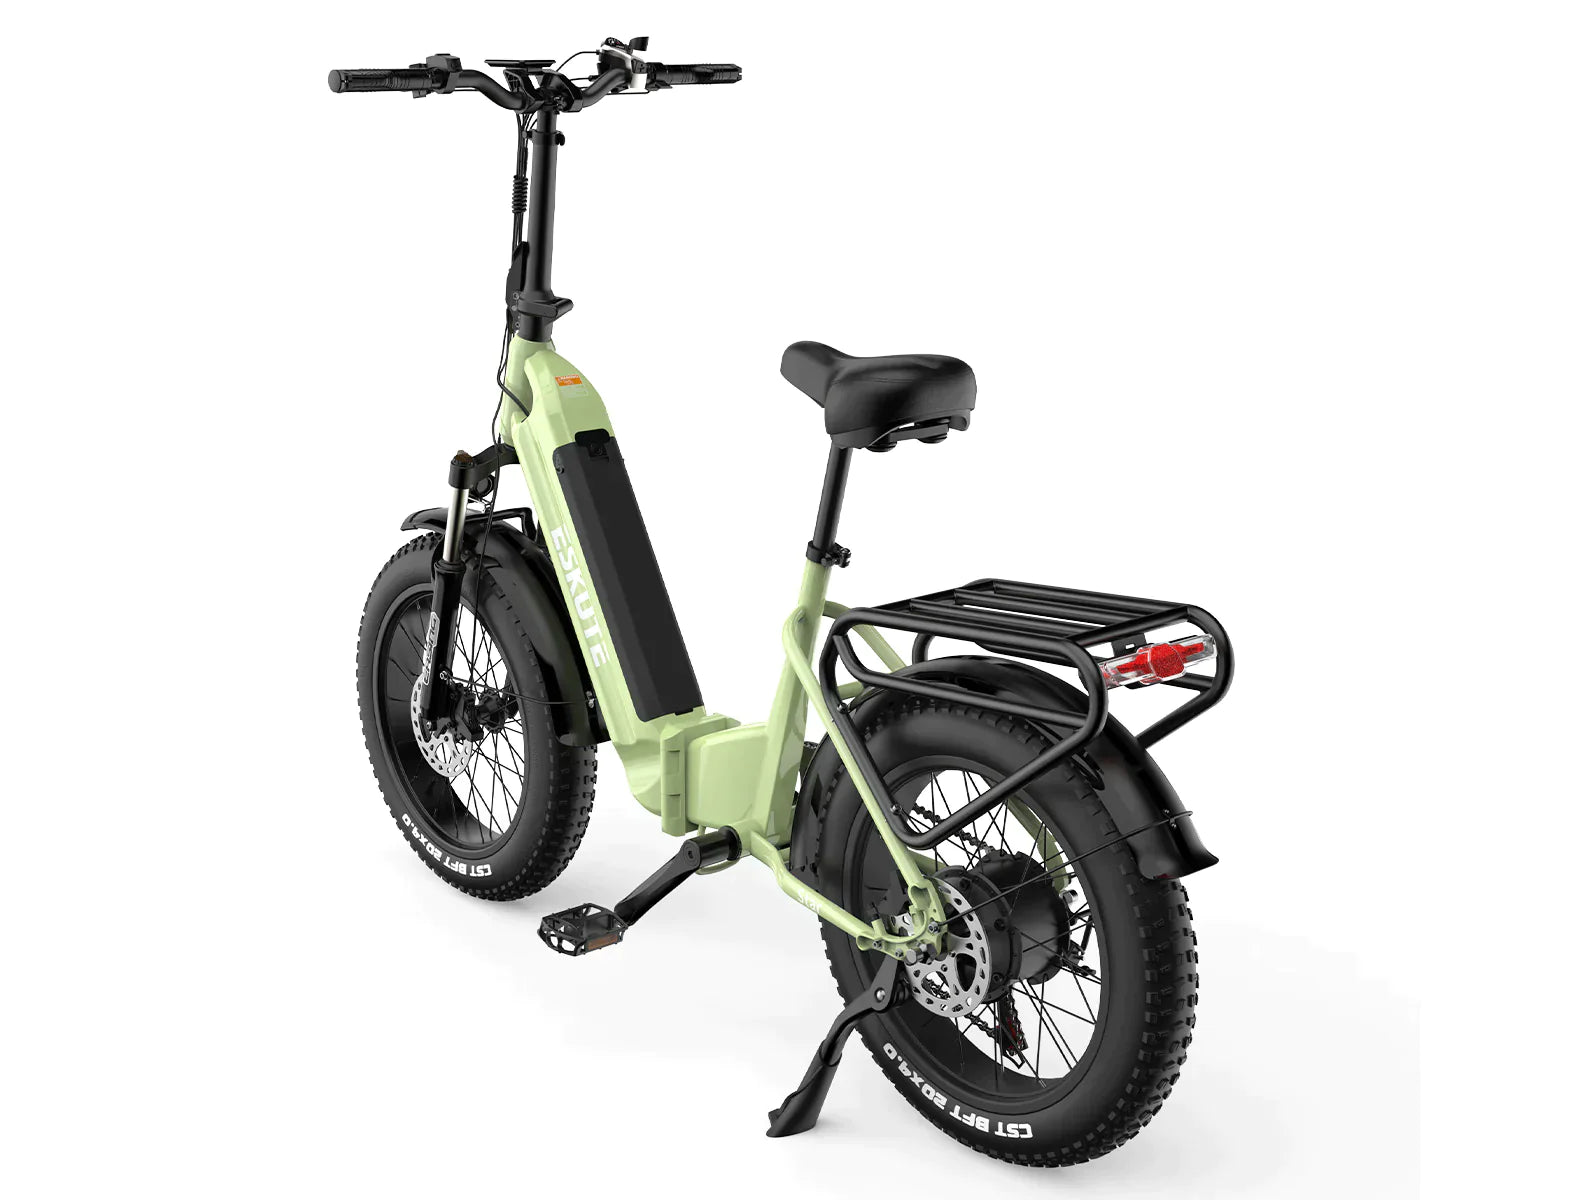 ESKUTE Star Folding Electric Bike_UK - Pogo cycles UK -cycle to work scheme available